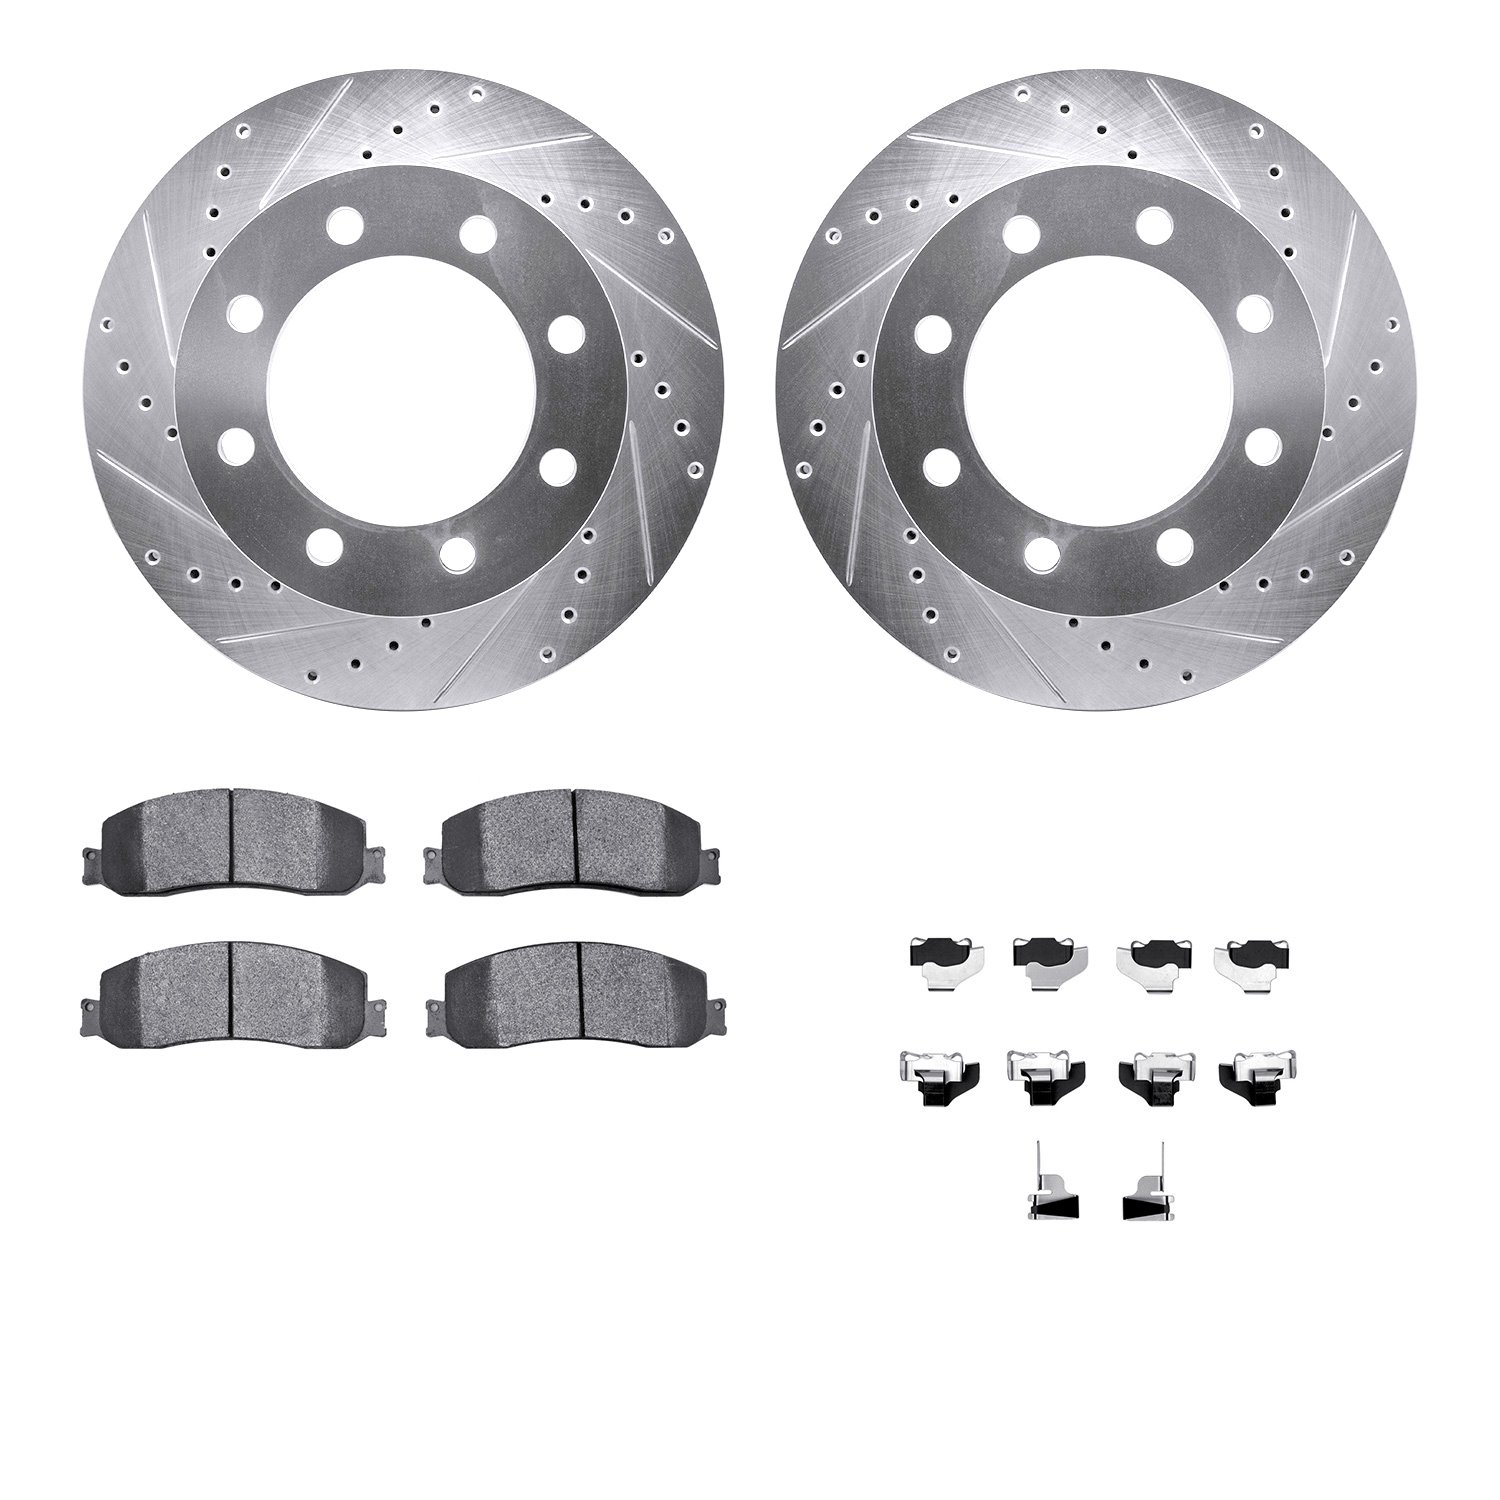 7212-99201 Drilled/Slotted Rotors w/Heavy-Duty Brake Pads Kit & Hardware [Silver], 2010-2012 Ford/Lincoln/Mercury/Mazda, Positio